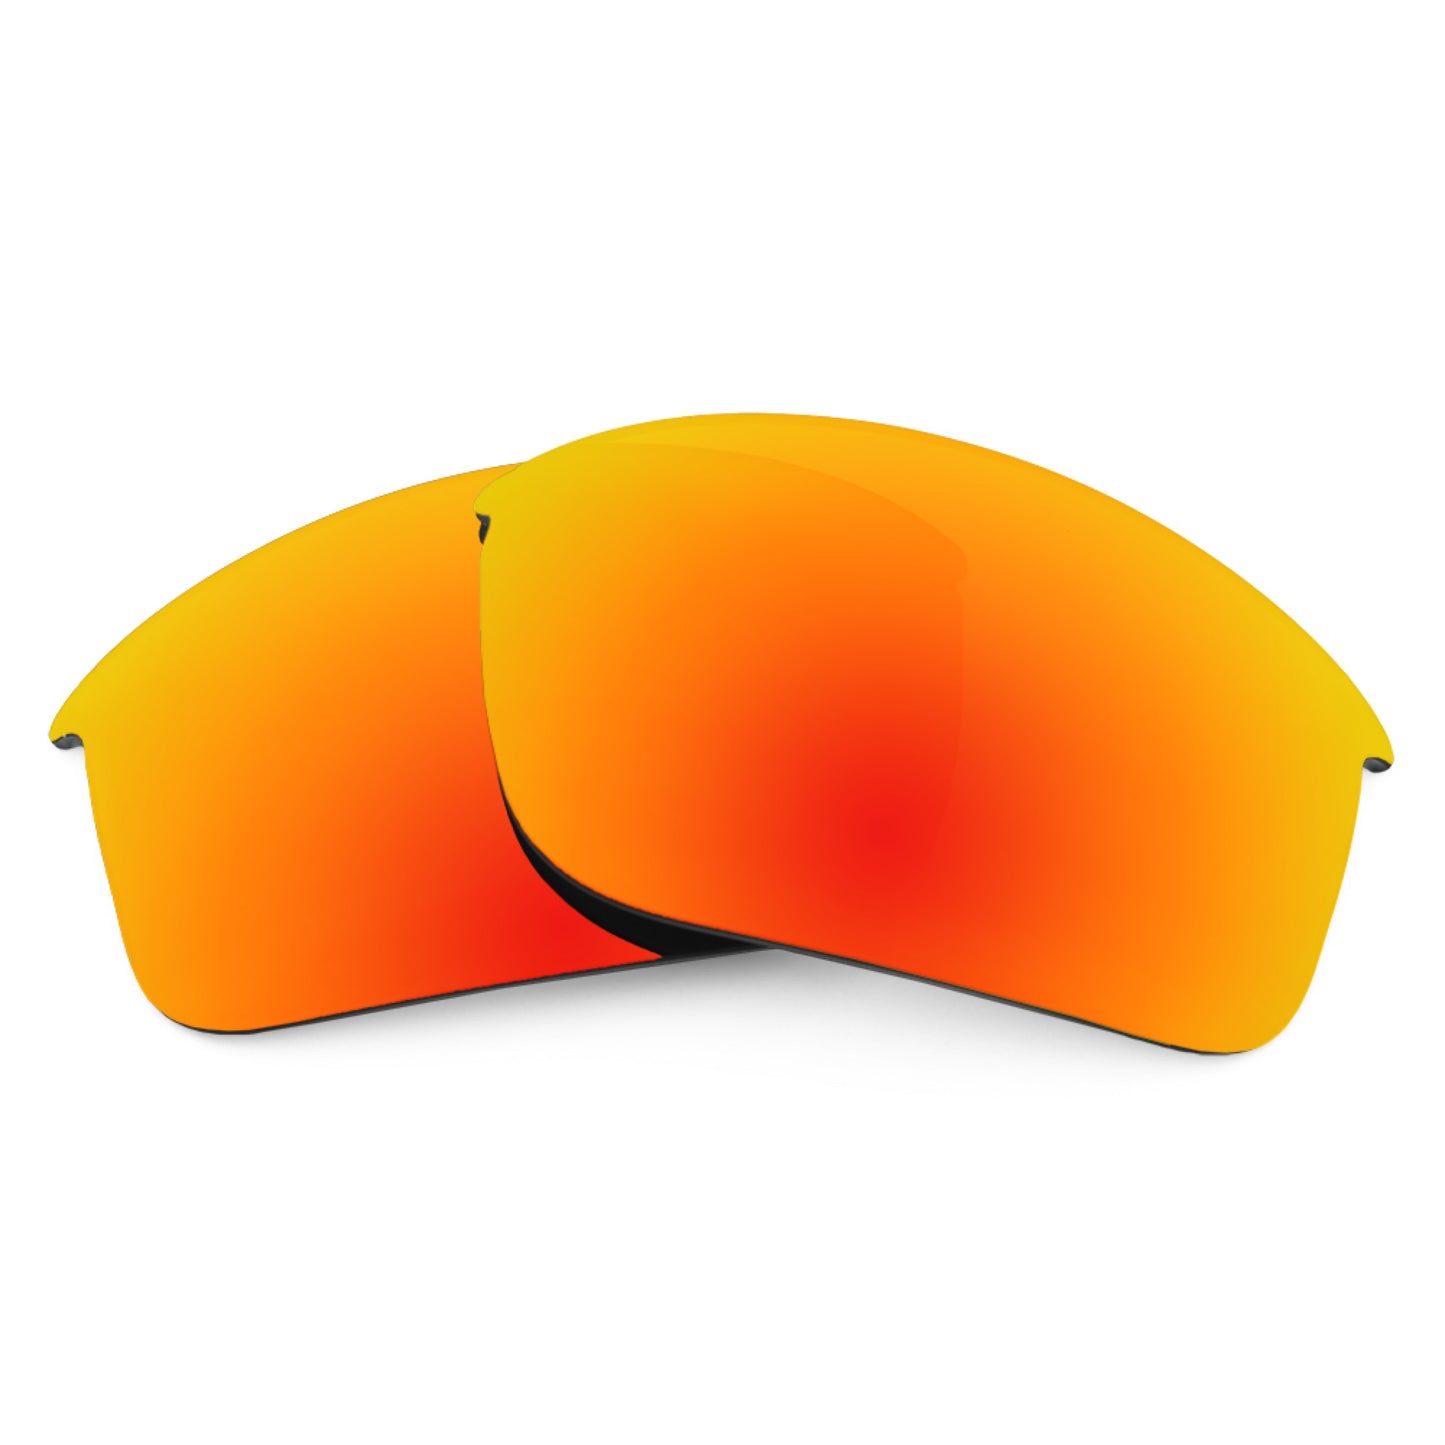 Revant replacement lenses for Costa Galveston Polarized Fire Red